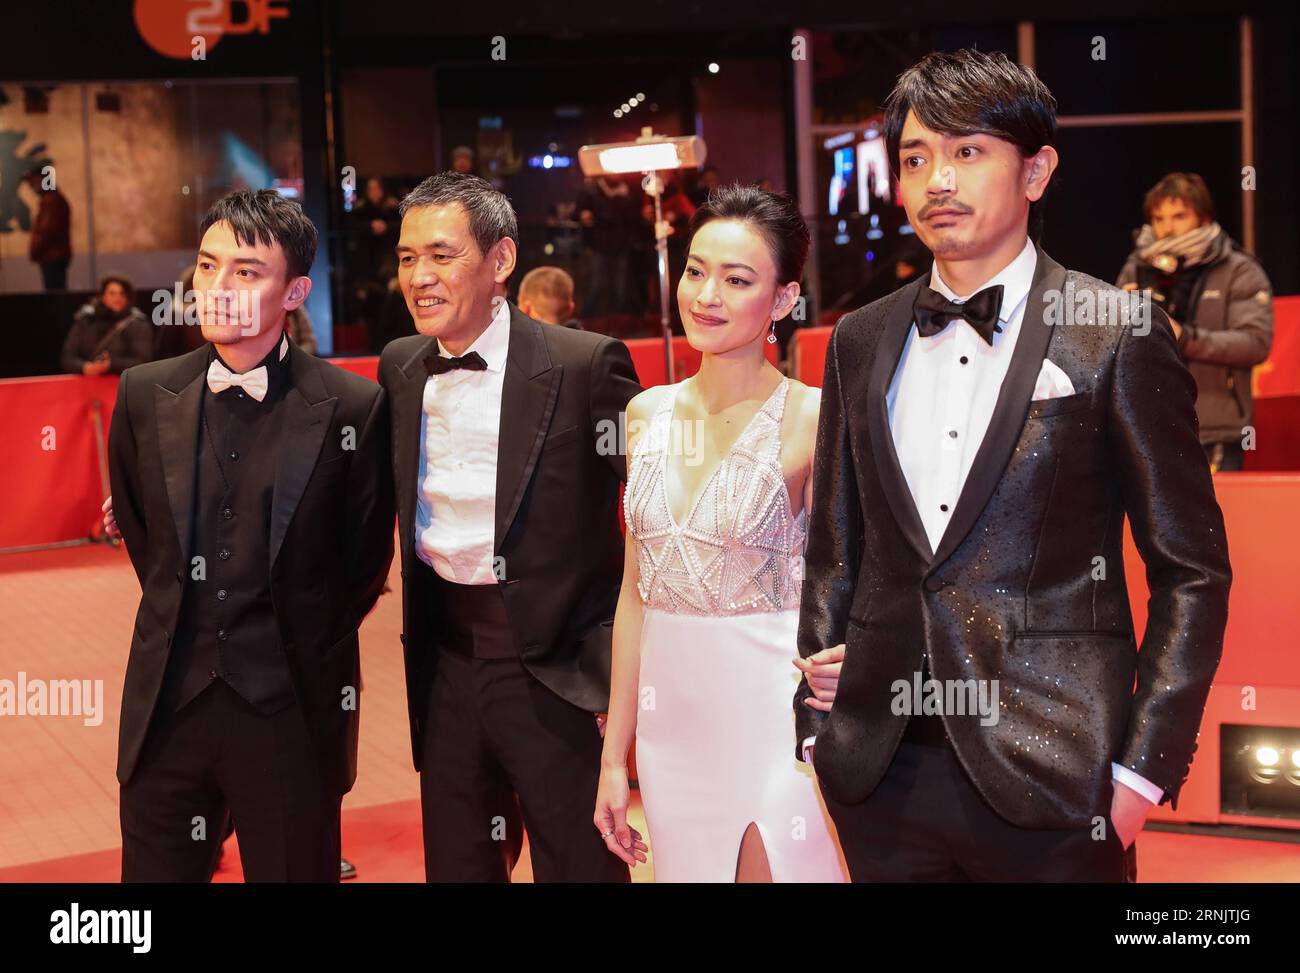 BERLIN, Feb. 13, 2017 -- Director Sabu (2nd L), actor Chang Chen (1st L), actress Yao Yiti (2nd R) and actor Sho Aoyagi pose for photos on the red carpet for the premiere of film Mr. Long during the 67th Berlin International Film Festival in Berlin, capital of Germany, on Feb. 13, 2017. ) (zy) GERMANY-BERLIN-67TH BERLINALE- MR. LONG ShanxYuqi PUBLICATIONxNOTxINxCHN   Berlin Feb 13 2017 Director SABU 2nd l Actor Chang Chen 1st l actress Yao  2nd r and Actor Sho Aoyagi Pose for Photos ON The Red Carpet for The Premiere of Film Mr Long during The 67th Berlin International Film Festival in Berlin Stock Photo